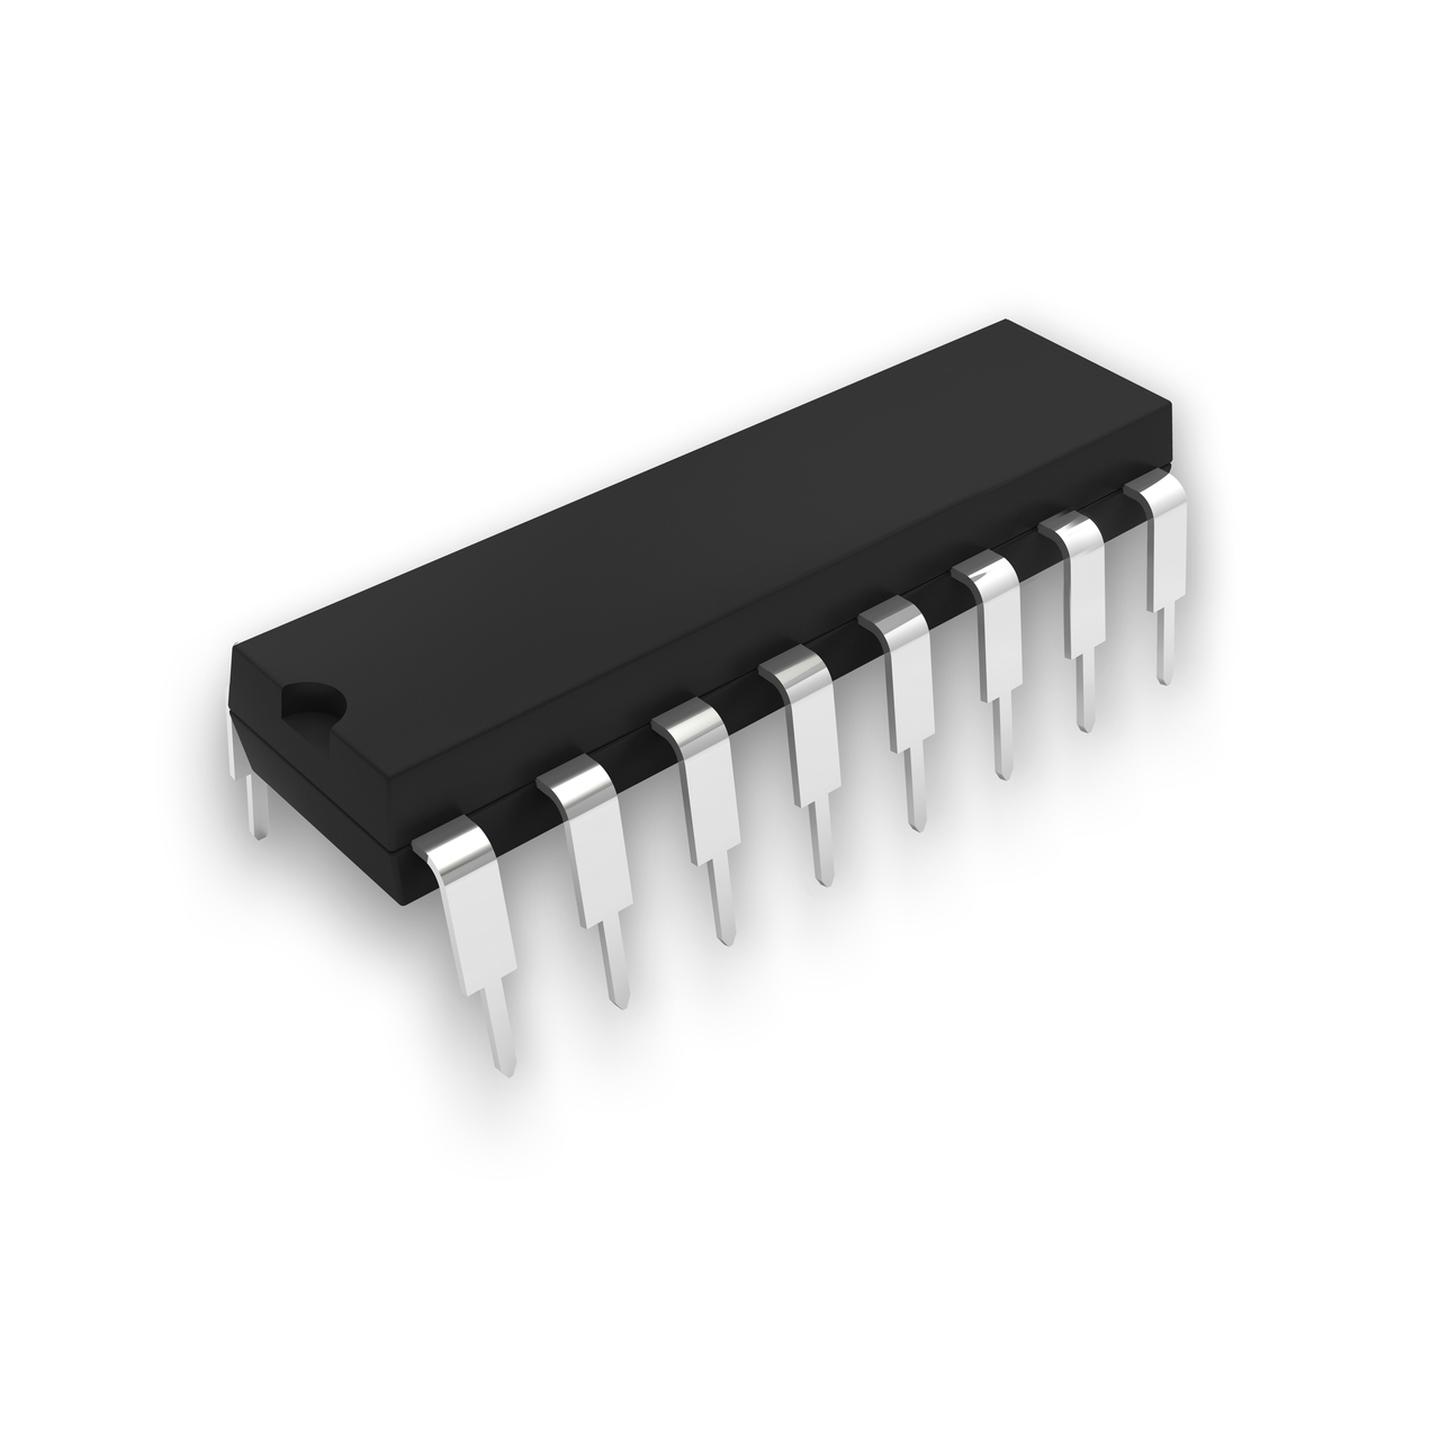 4511 BCD to 7-Segment Decoder/Driver CMOS IC